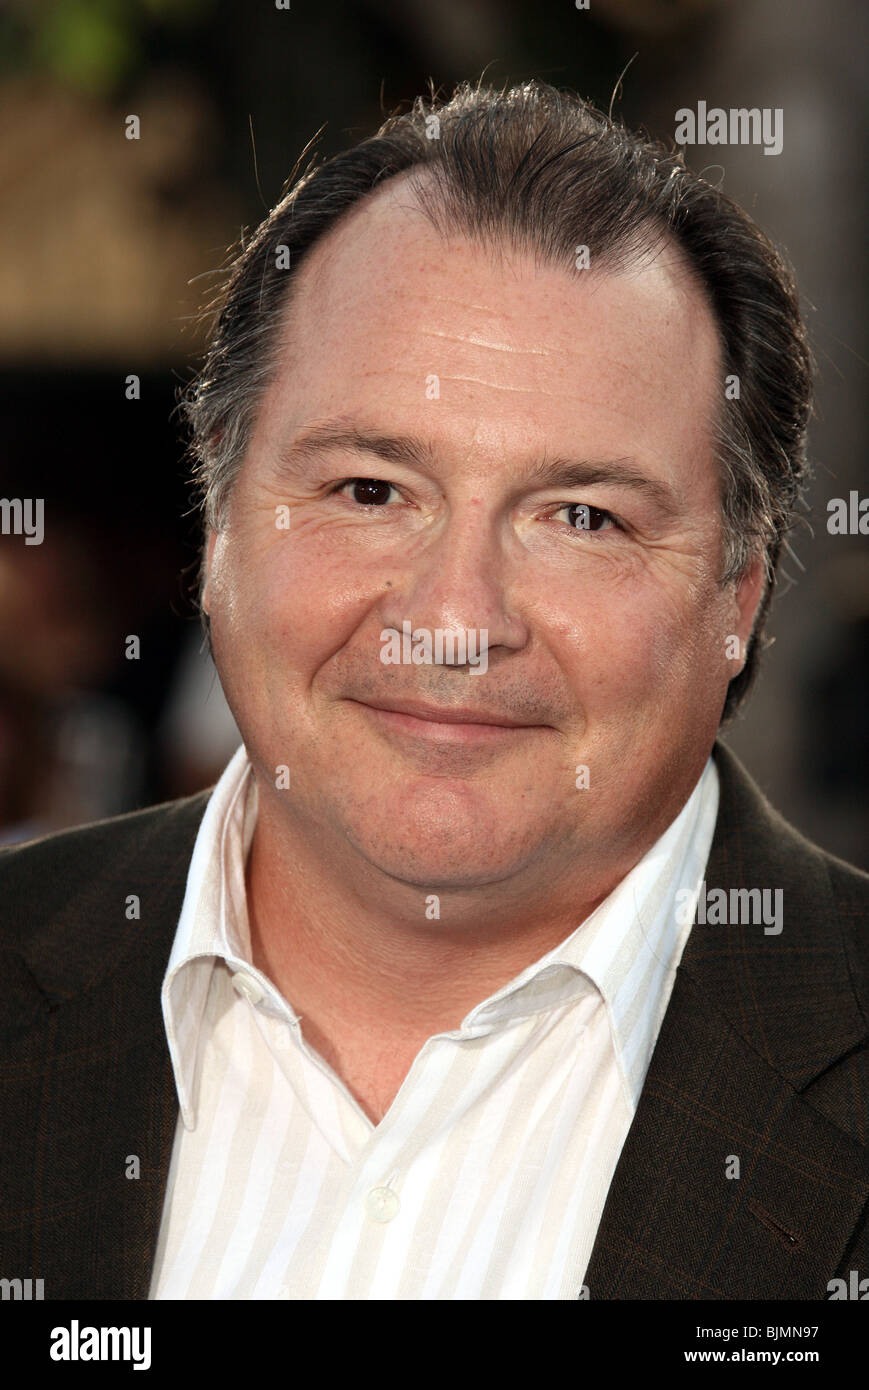 KEVIN DUNN TRANSFORMERS PREMIERE WESTWOOD LOS ANGELES USA 27 June 2007 Stock Photo